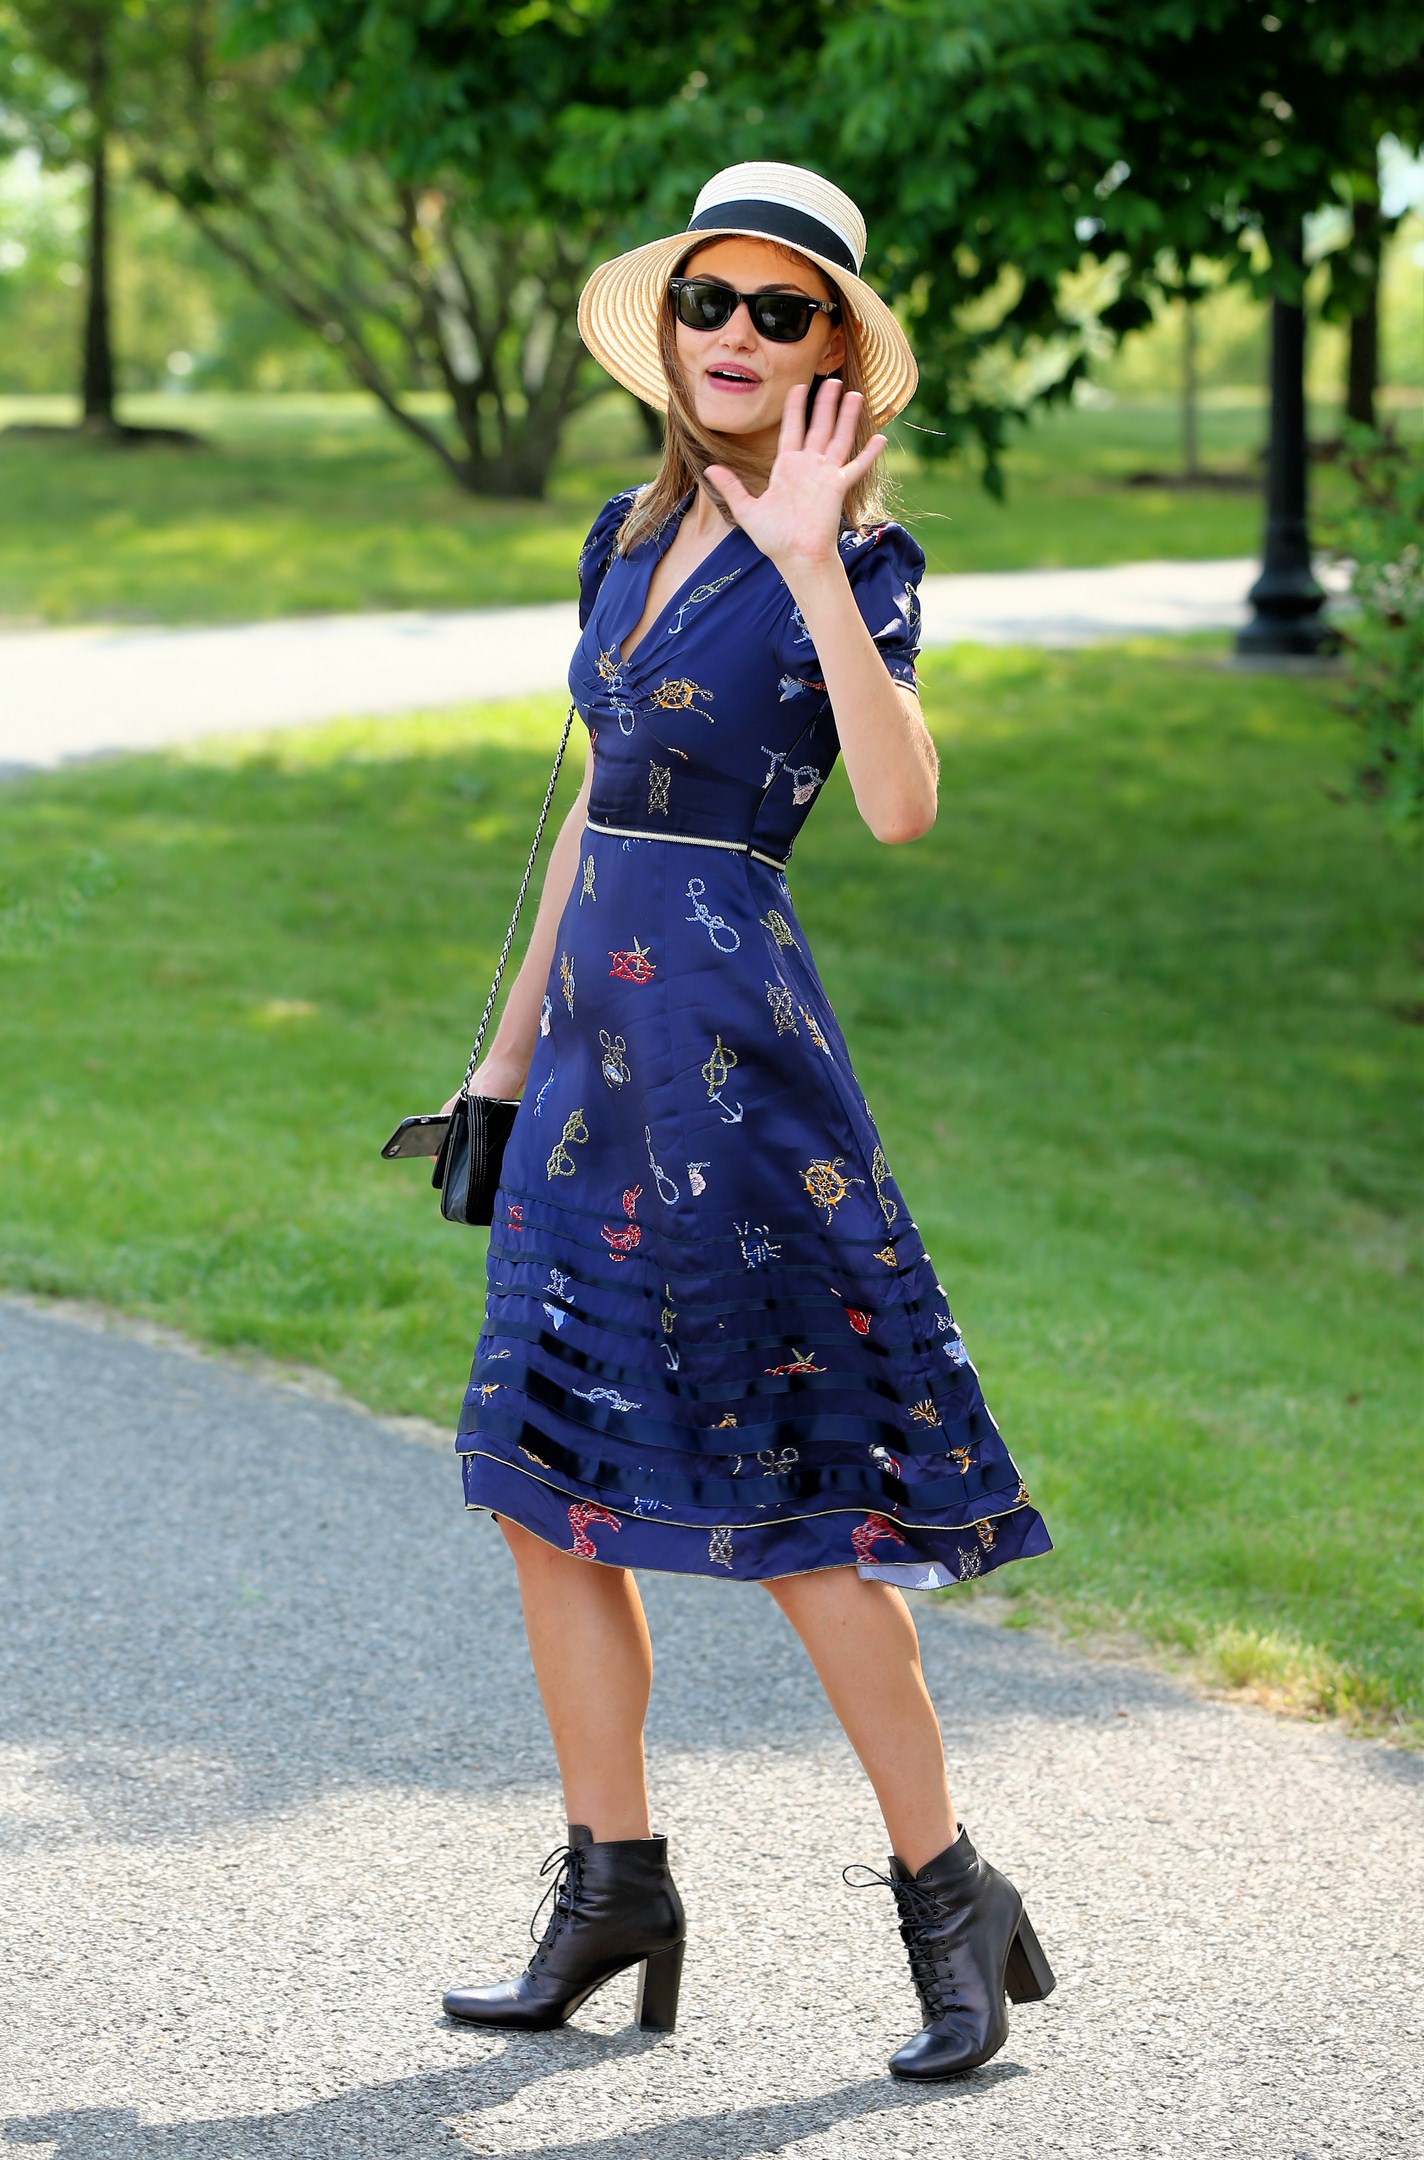 phoebe-tonkin-the-ninth-annual-veuve-clicquot-polo-classic-in-new-jersey-6416-10 (Копировать).jpg